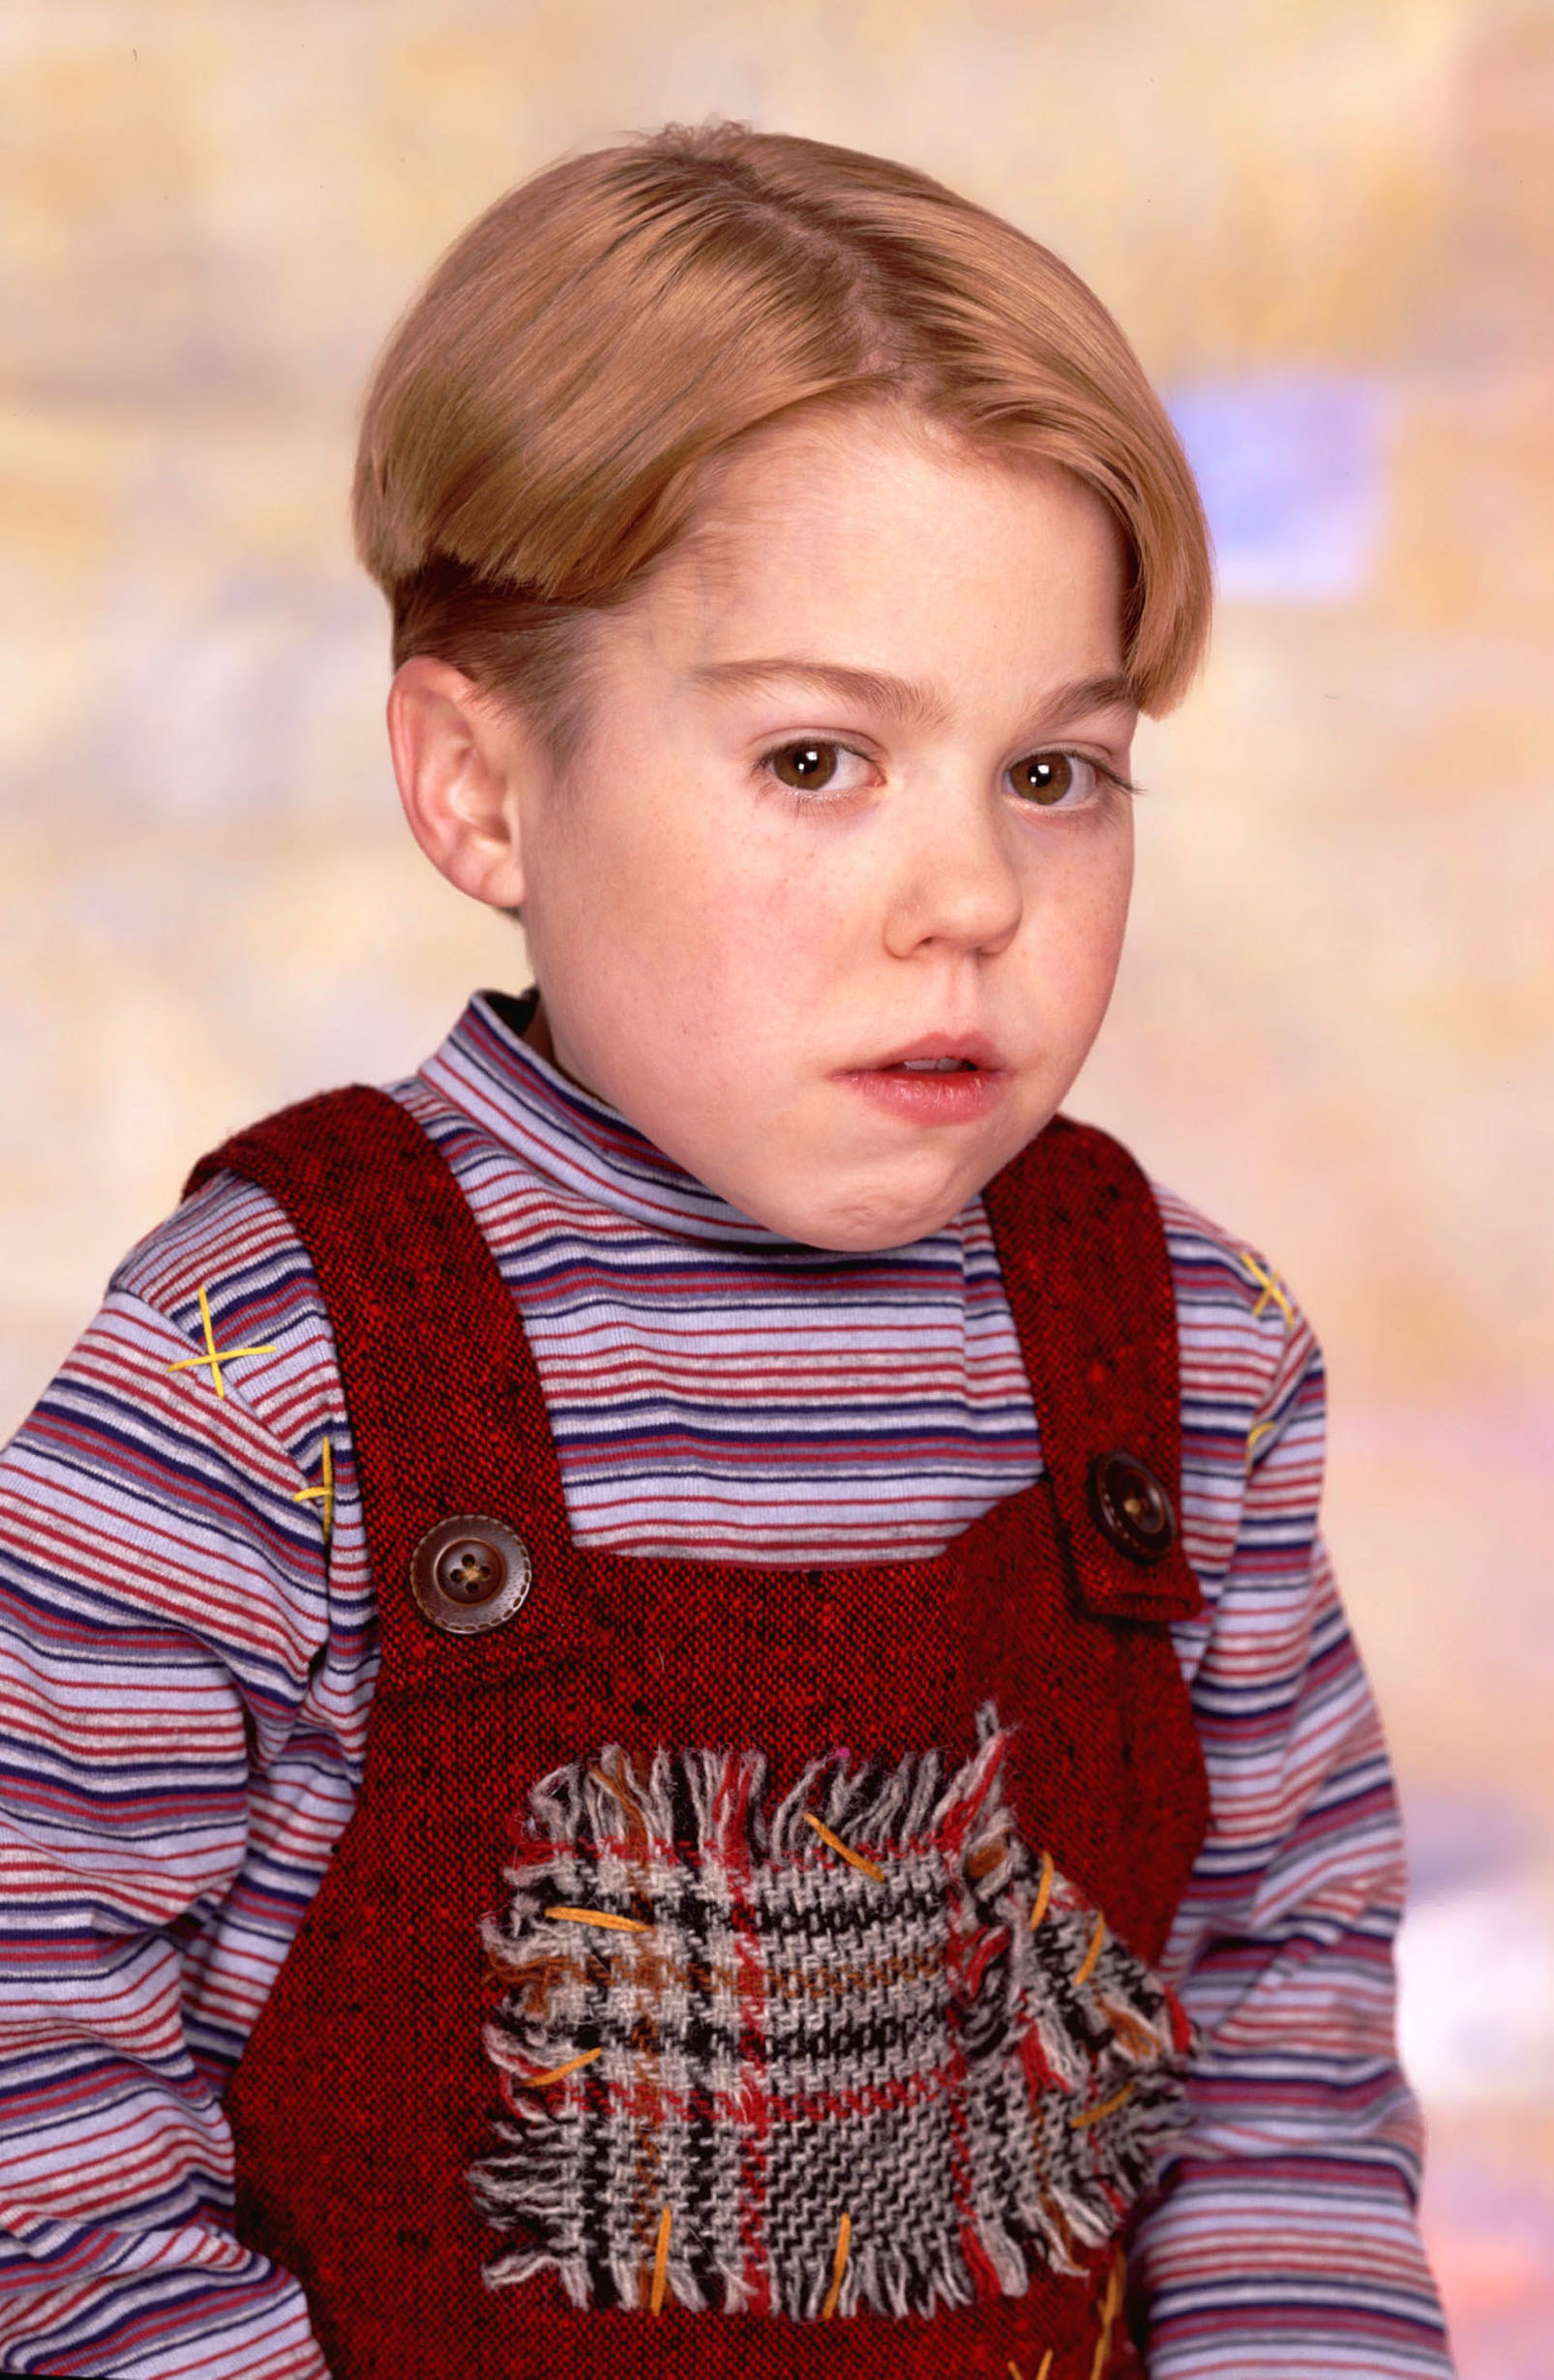 Close-up of Evans in overalls and a striped shirt